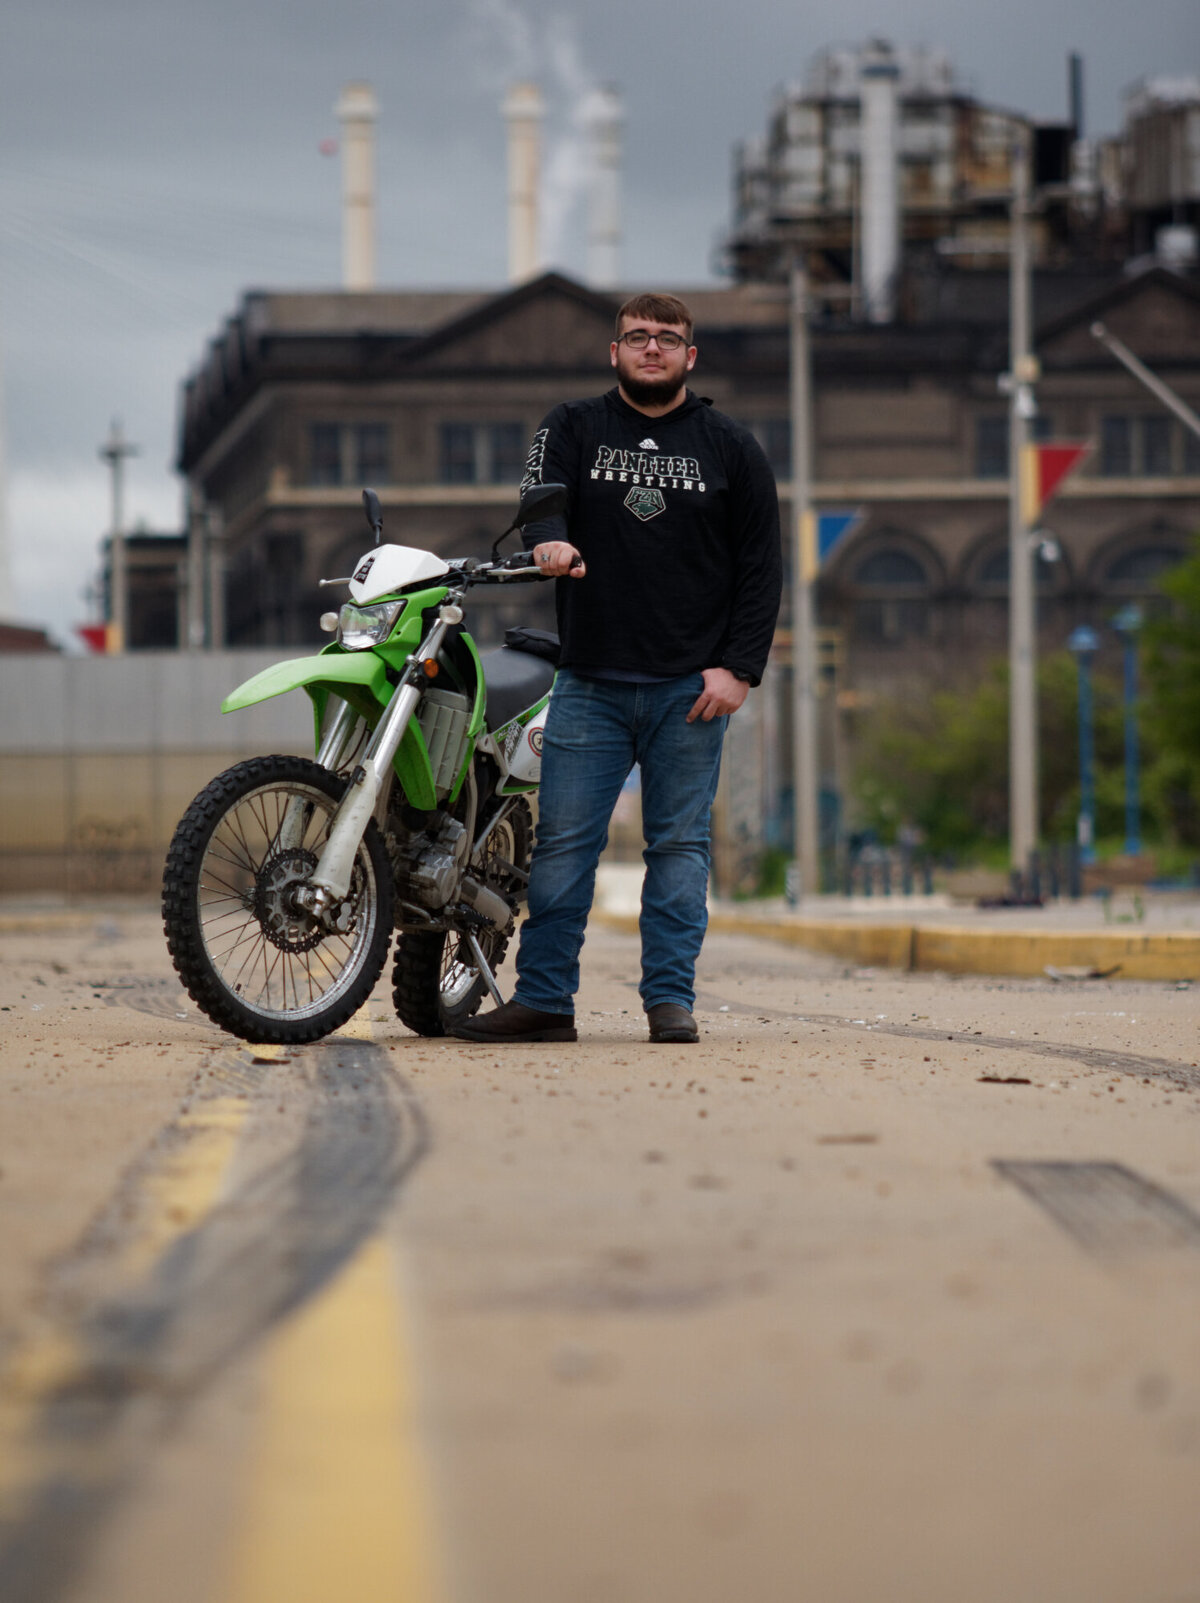 guy in urban environment with motorcycle  outside daytime portrait